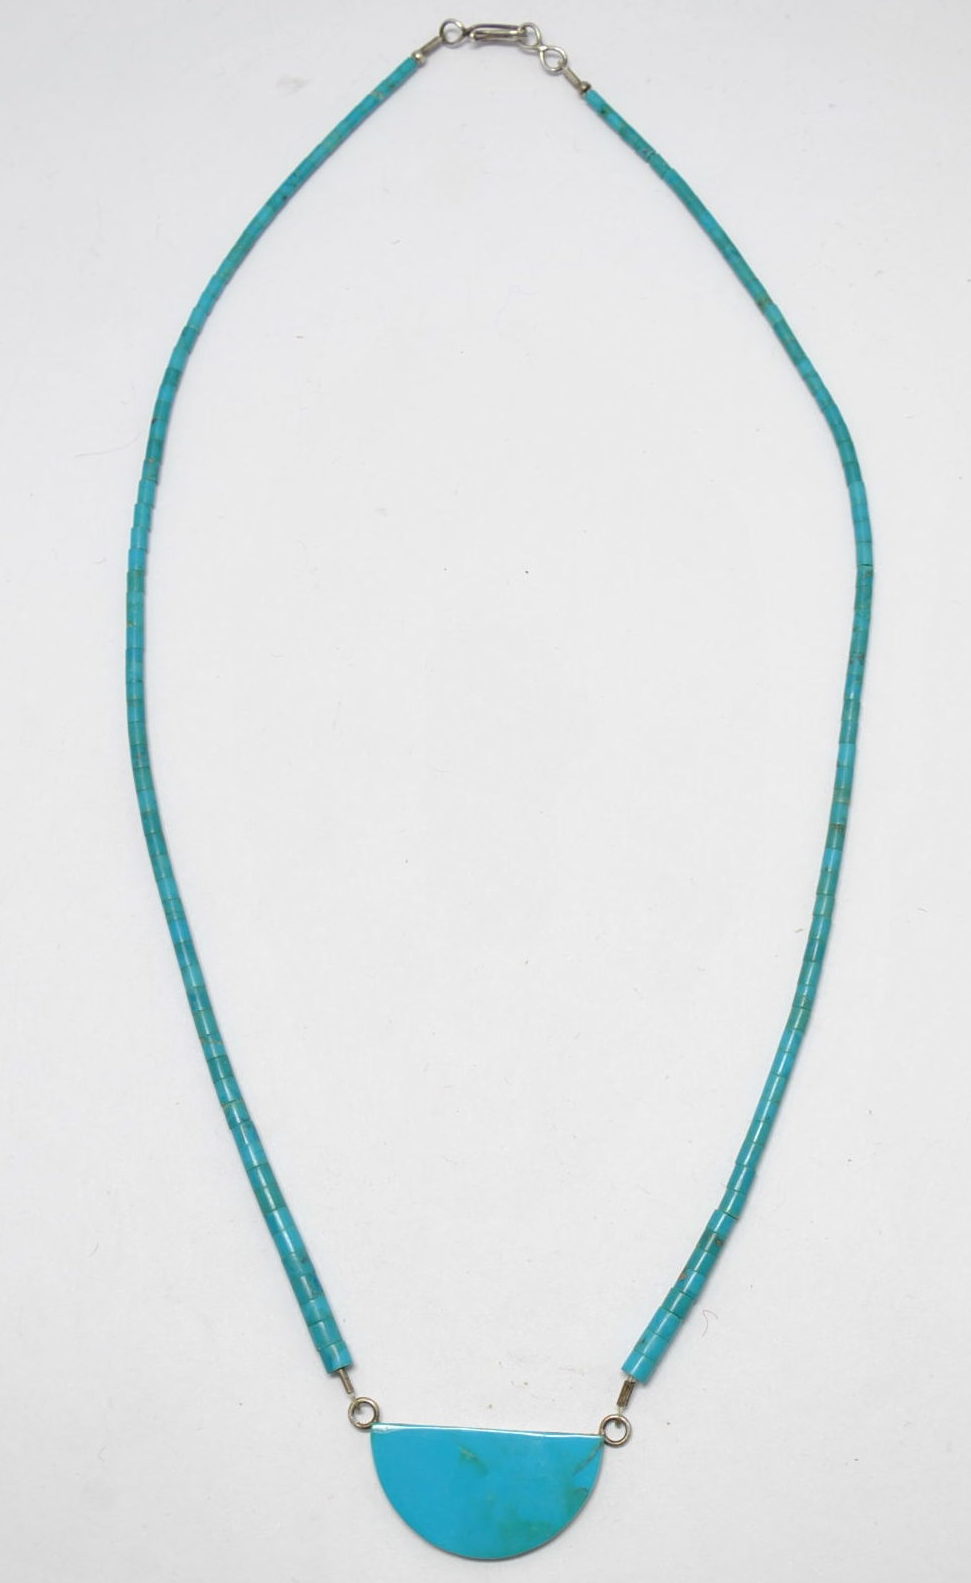 Collier turquoise demi cercle